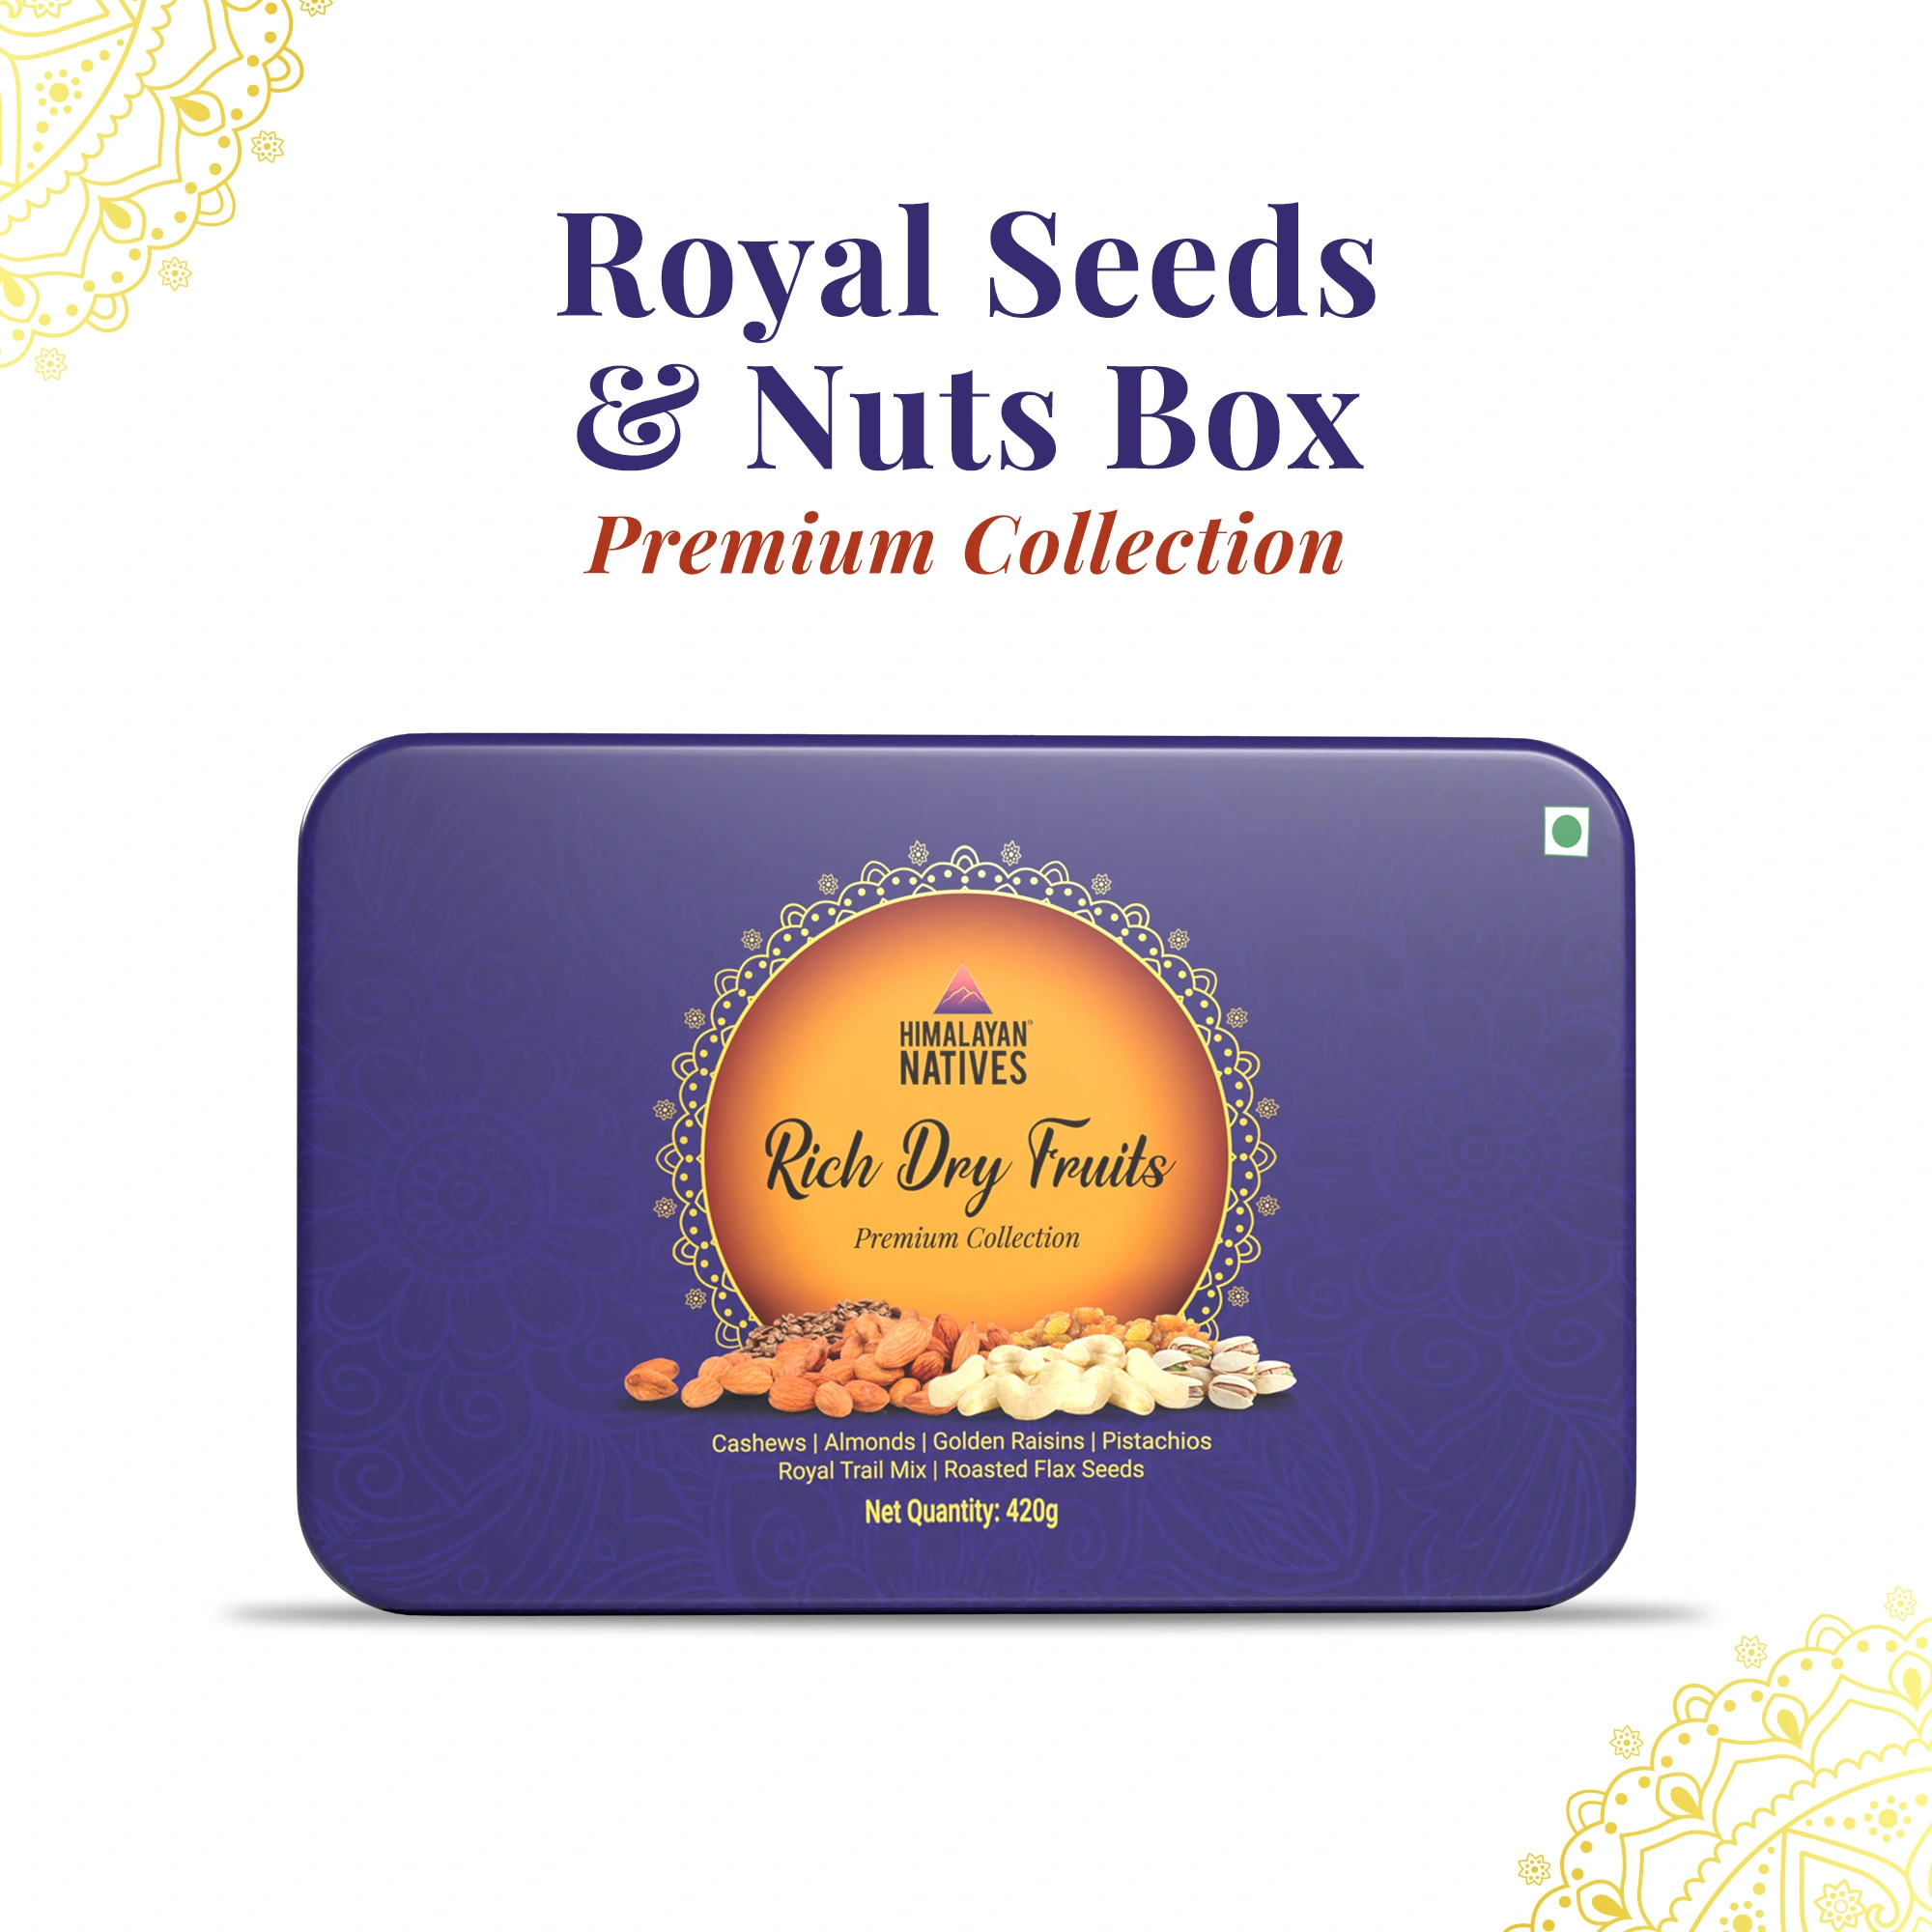 Royal Seeds & Nuts Box Premium collection